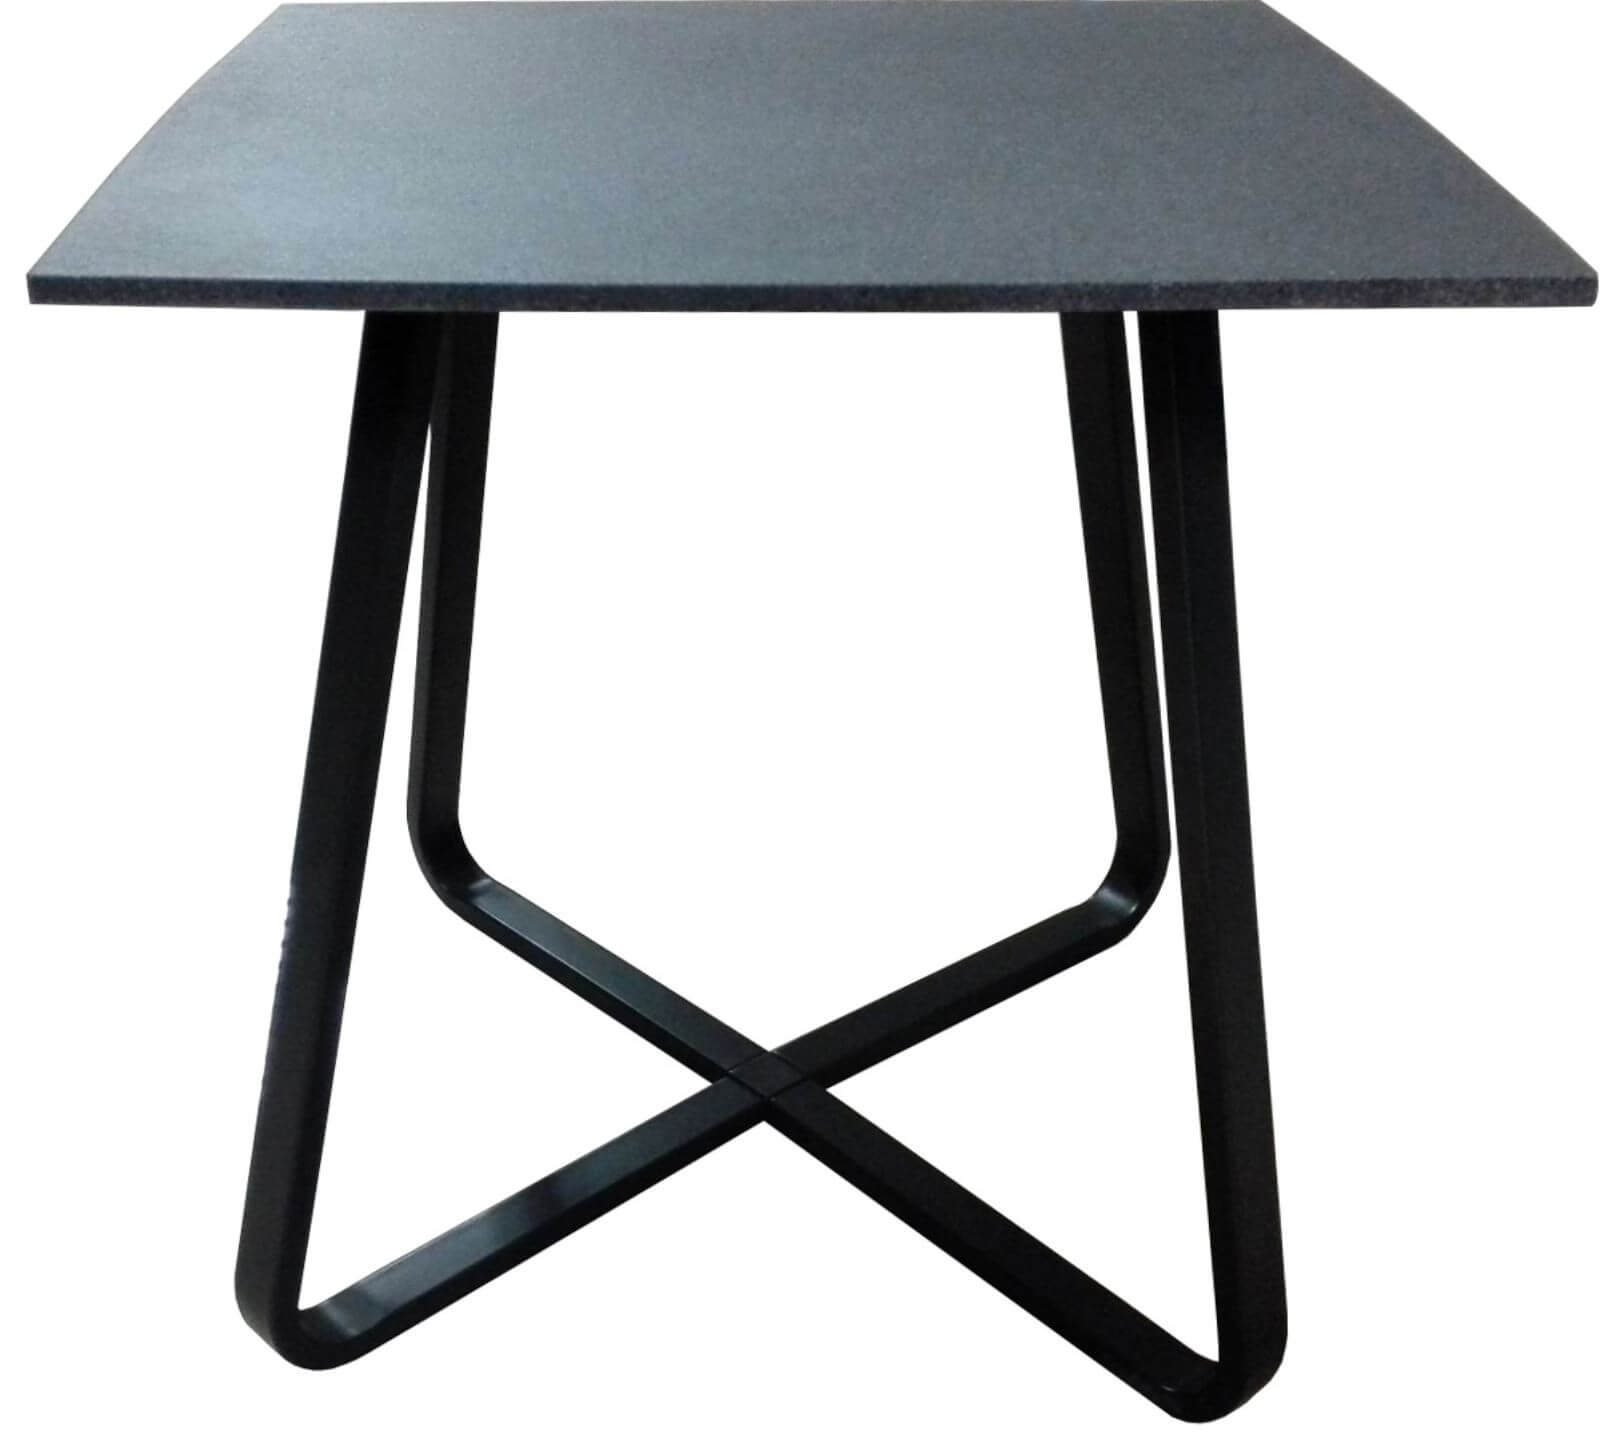 Showing image for Motion lamp table